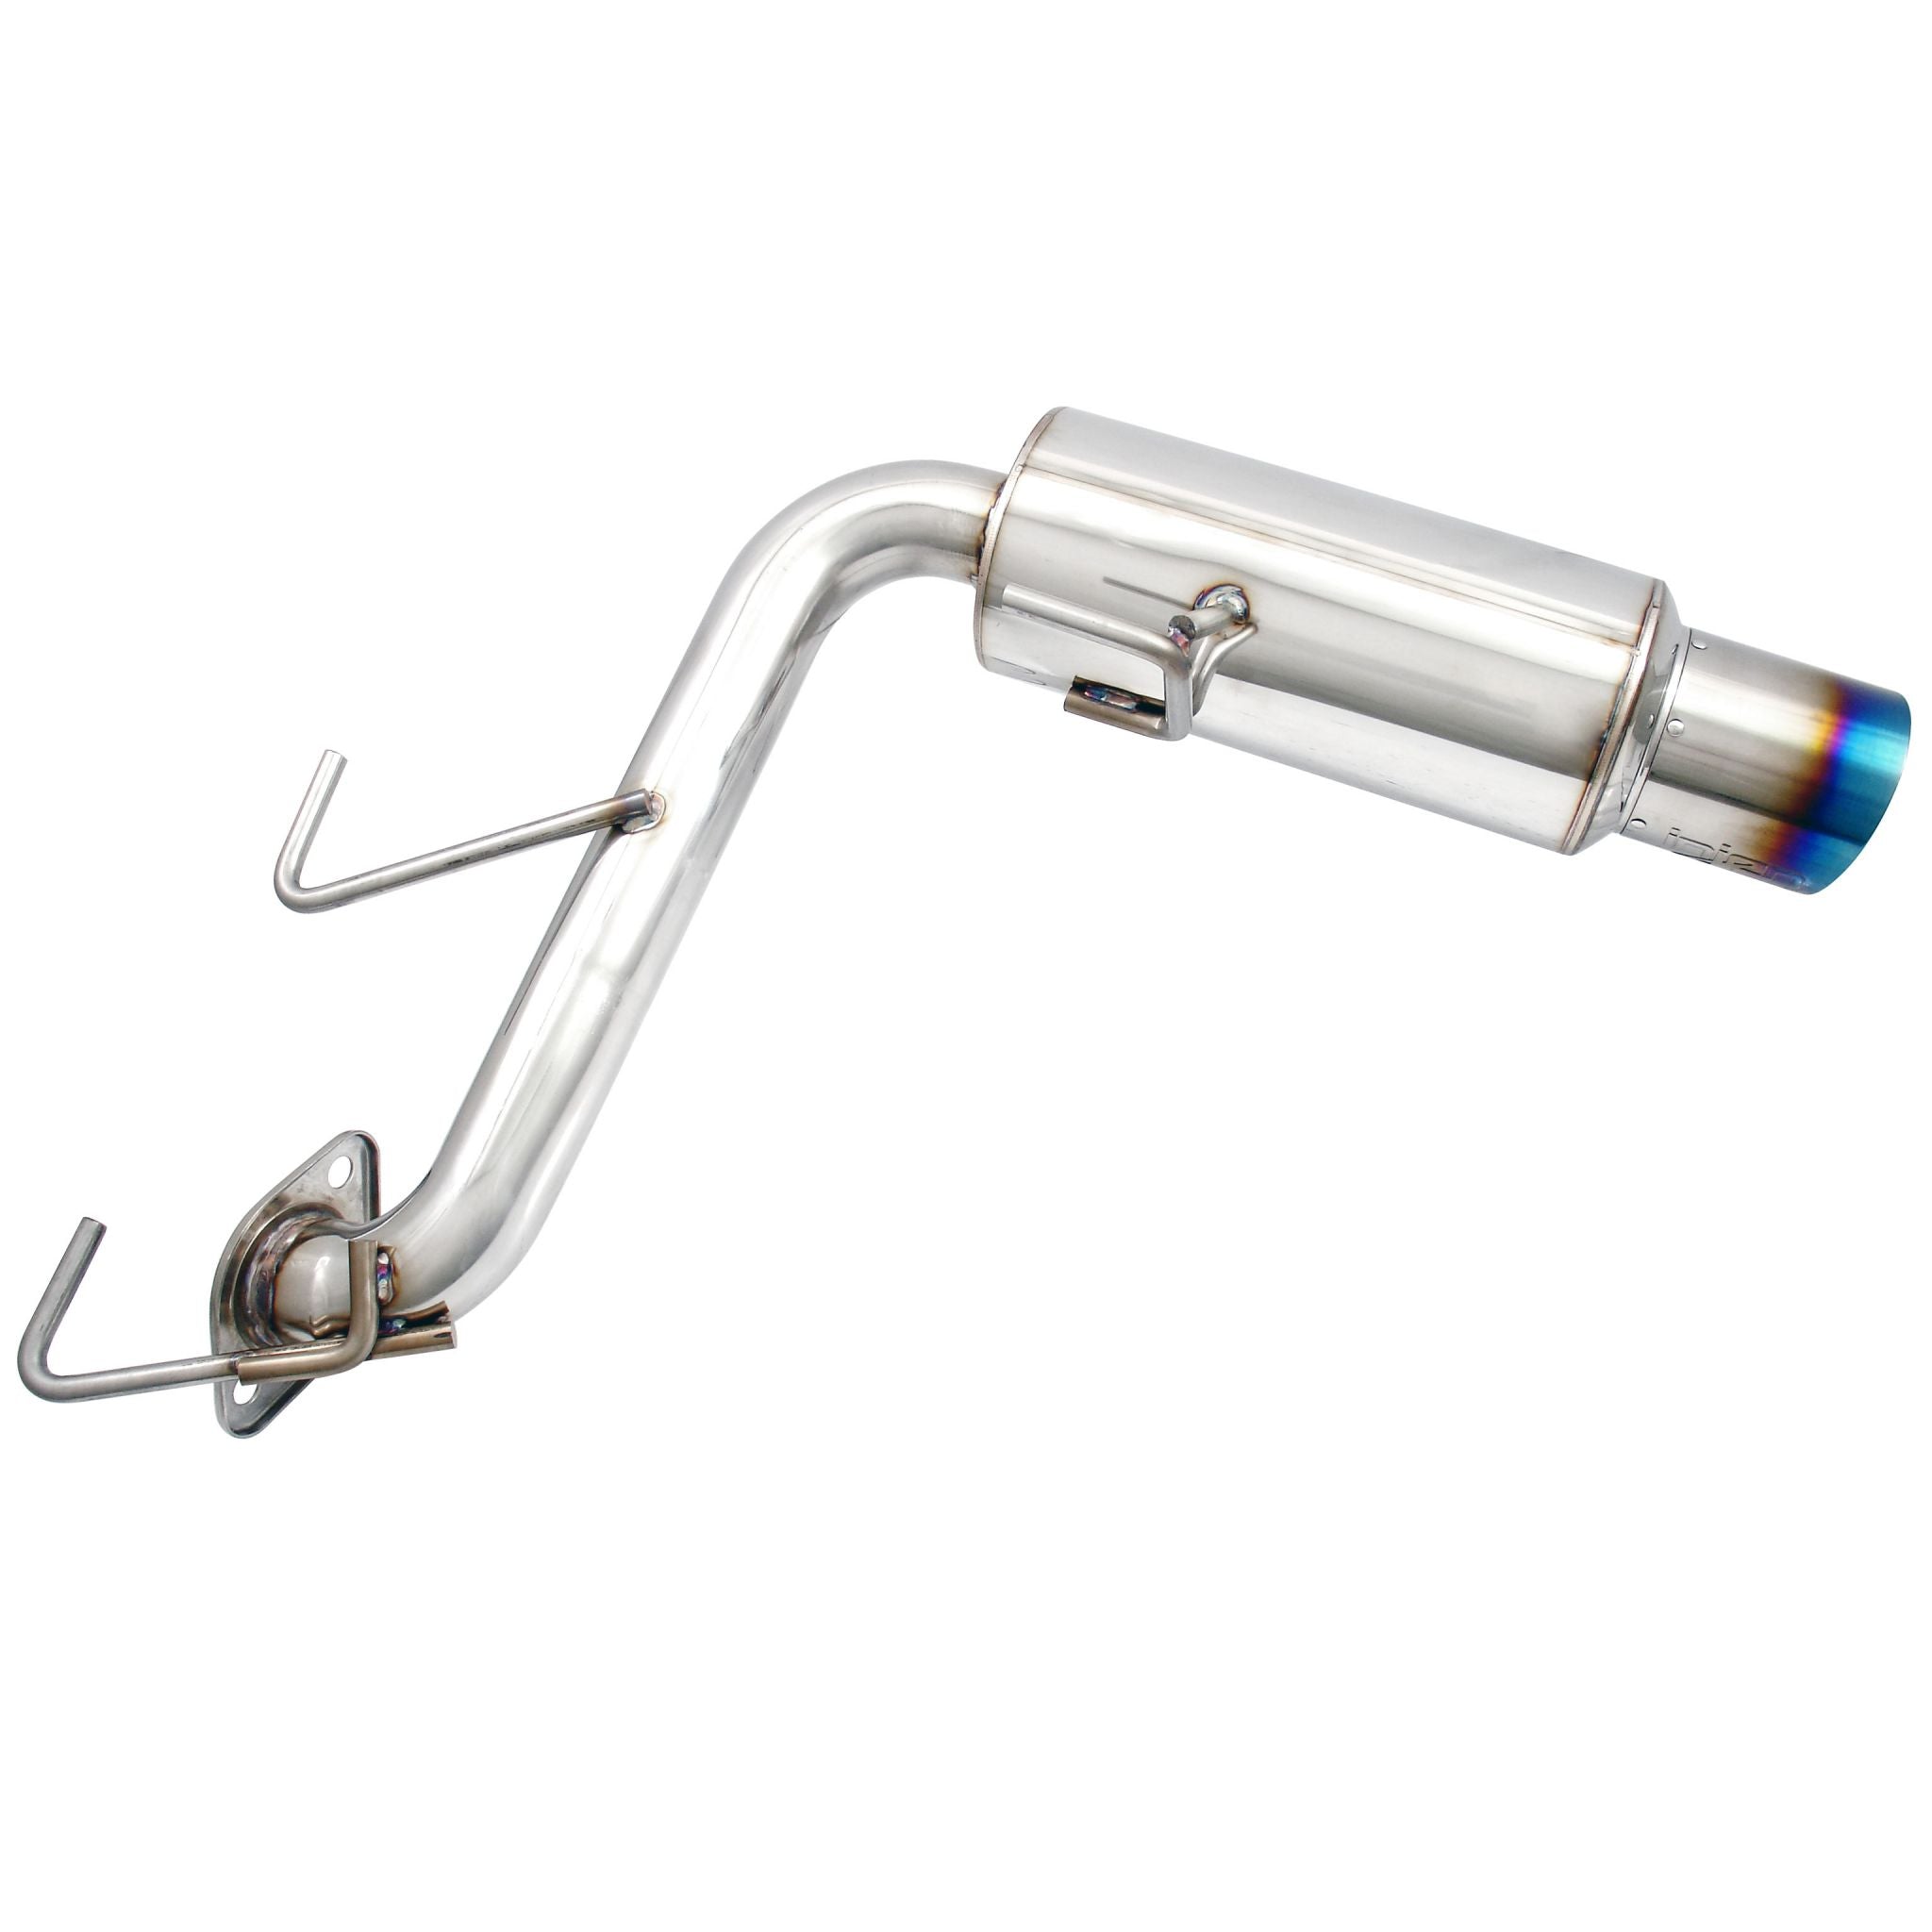 Injen Performance Axle Back Exhaust System